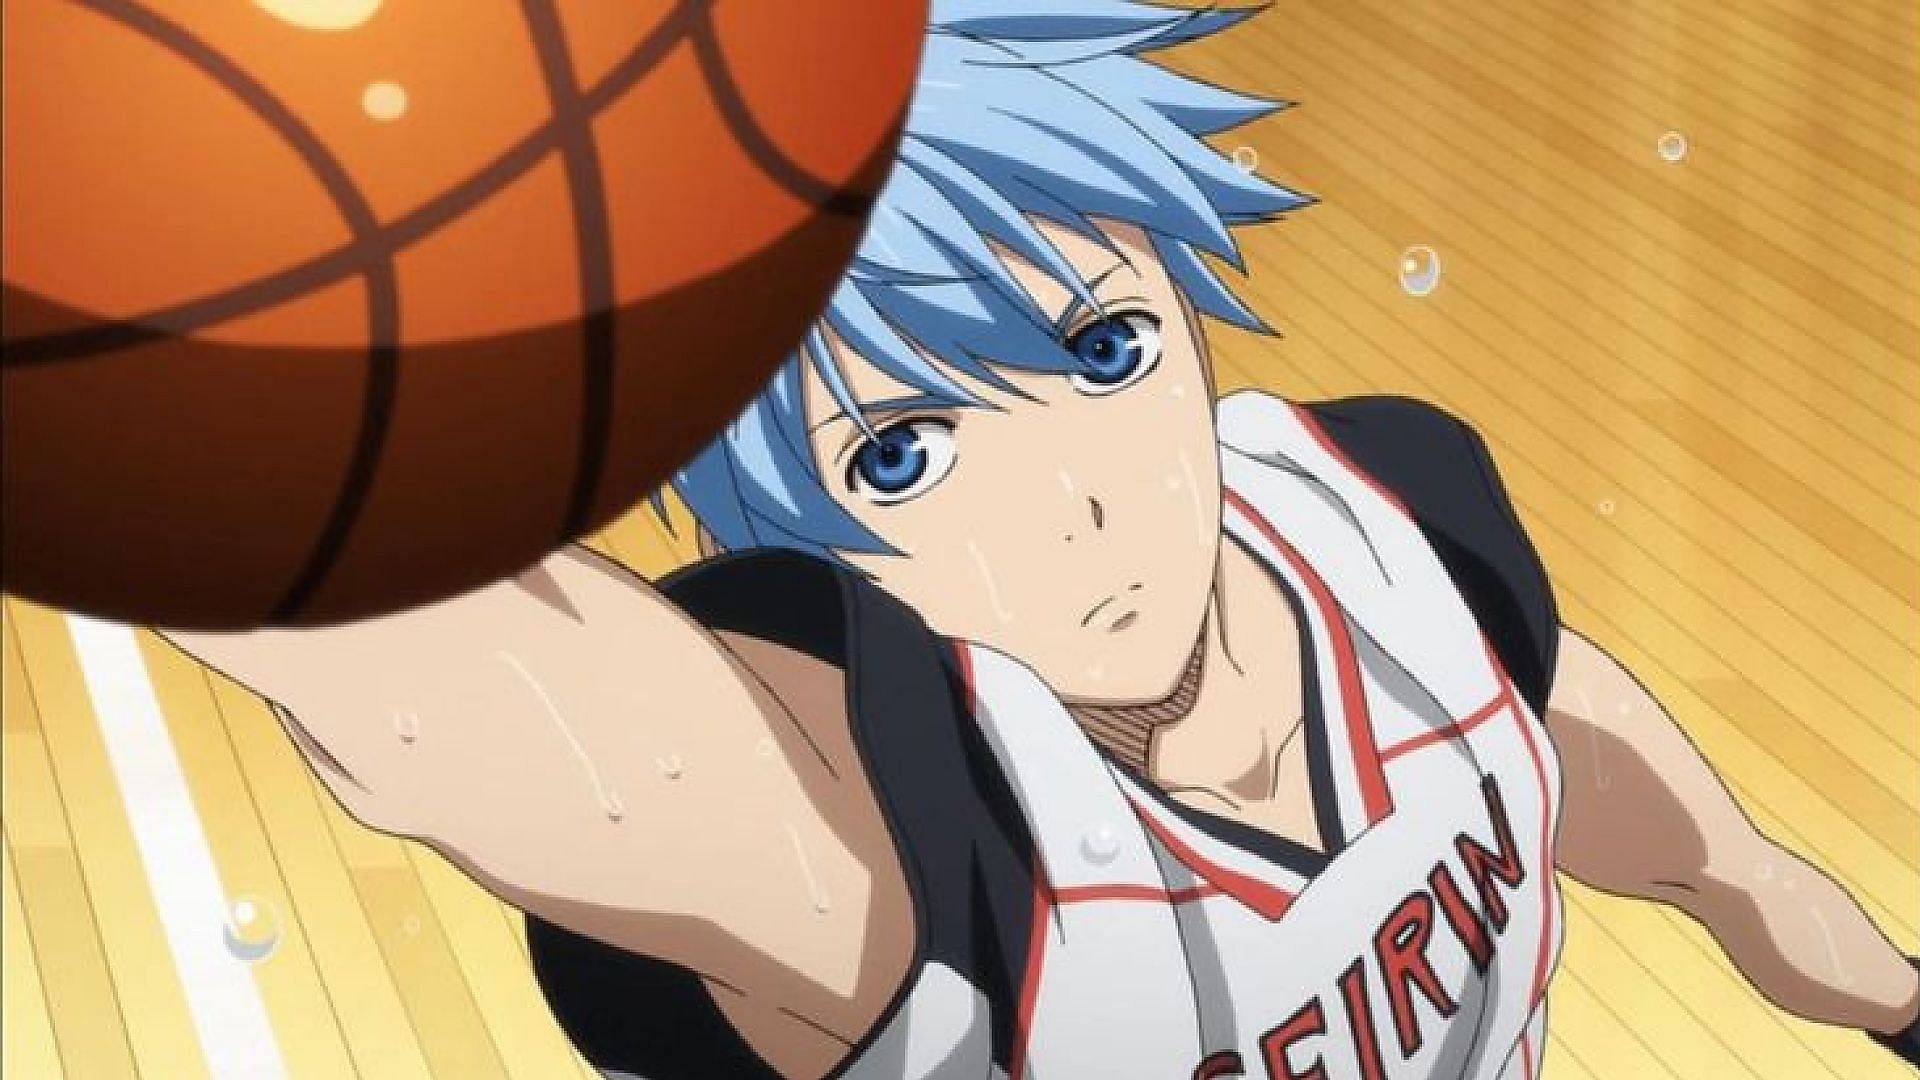 Kuroko is one of the most famed sports anime characters (Image via Production I.G)